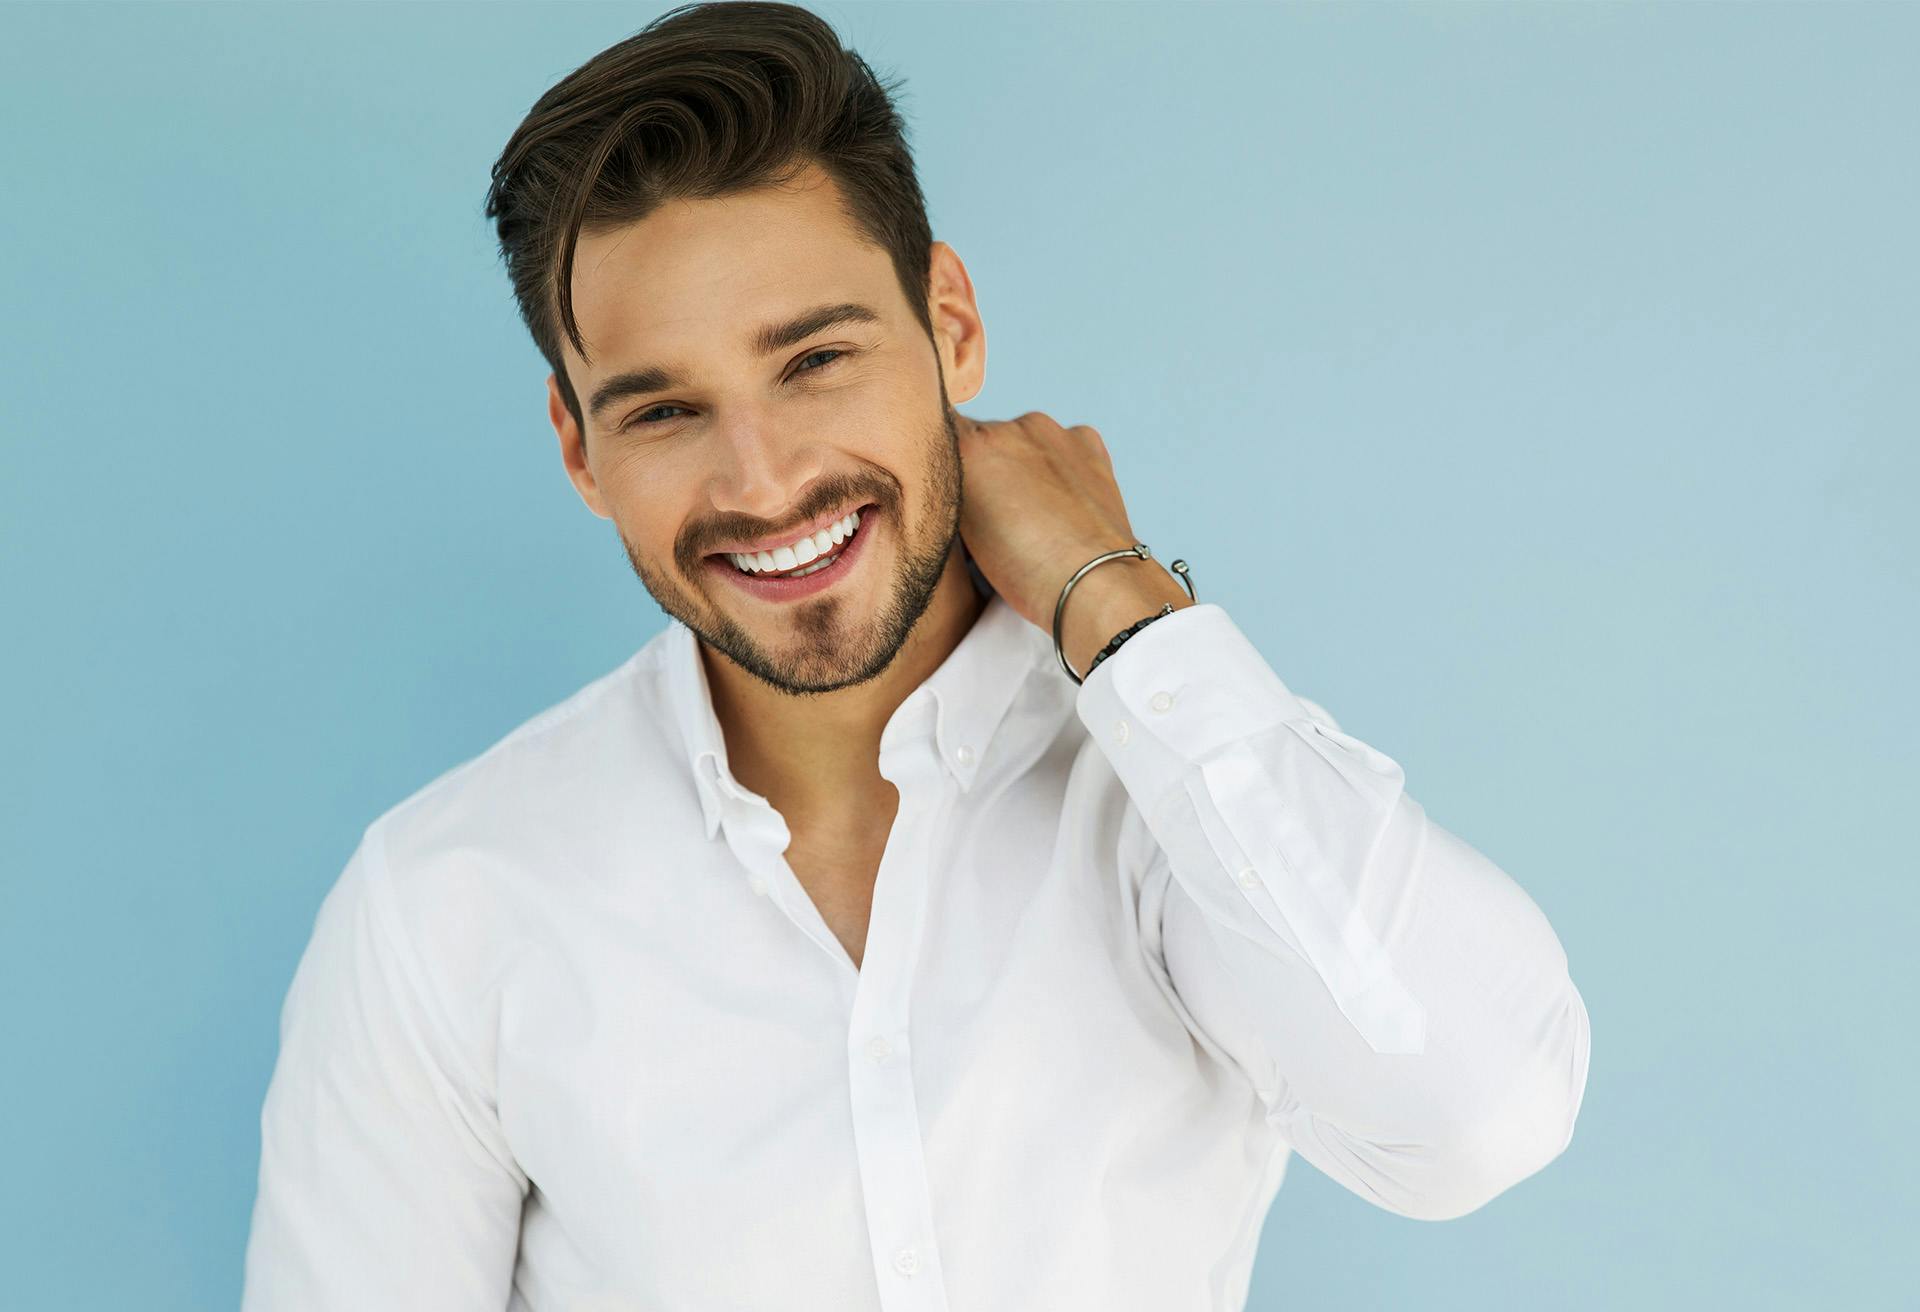 Man with Smiling with White Shirt and Blue Background